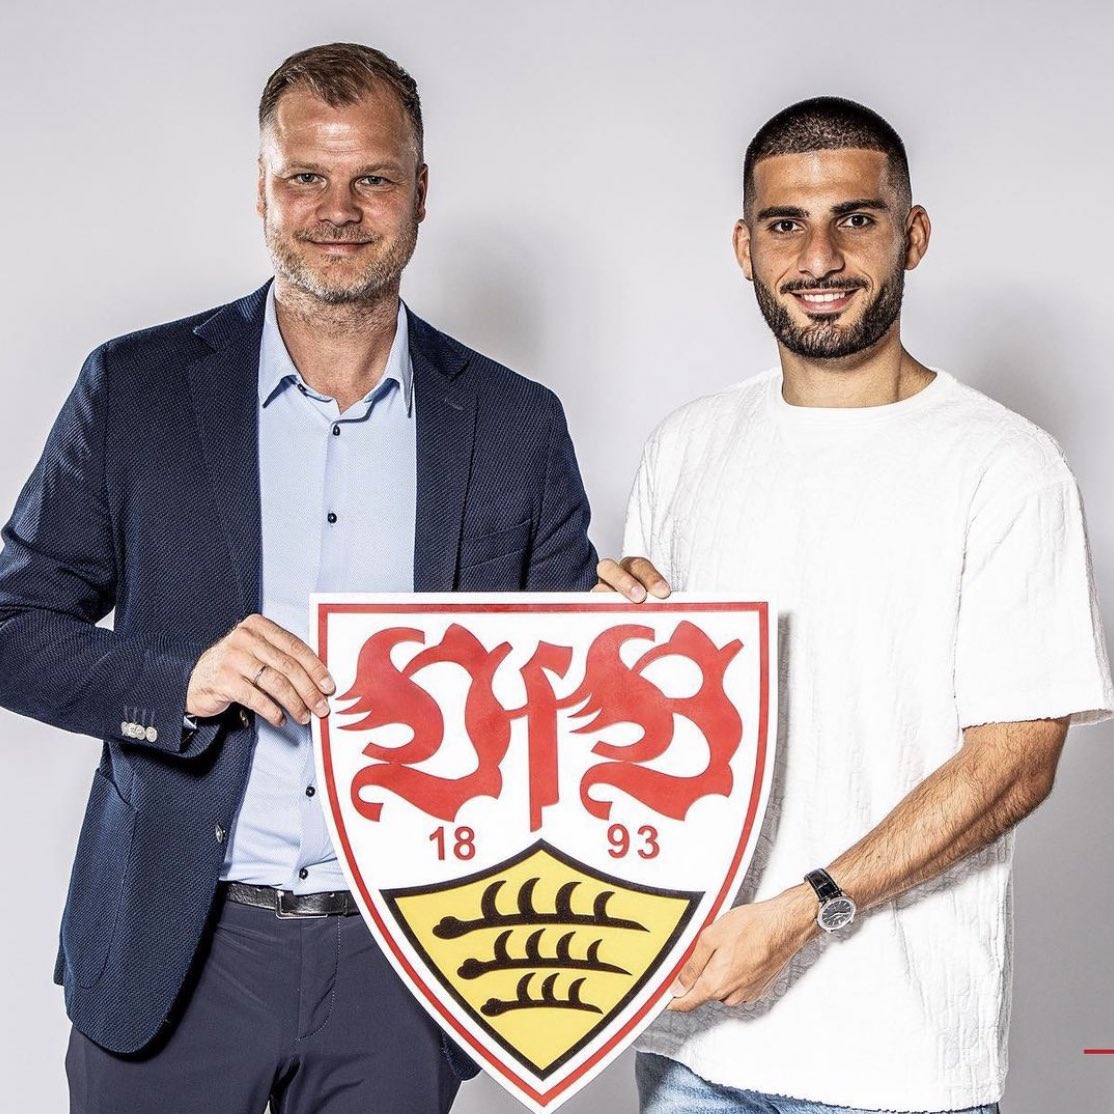 🔴⚪️ Deniz Undav sends clear message to Brighton: “We never know what’s next in life… but I hope to stay at Stuttgart”.

“My desire is clear, I want to stay at Stuttgart and have strong season there so we will see what happens”.